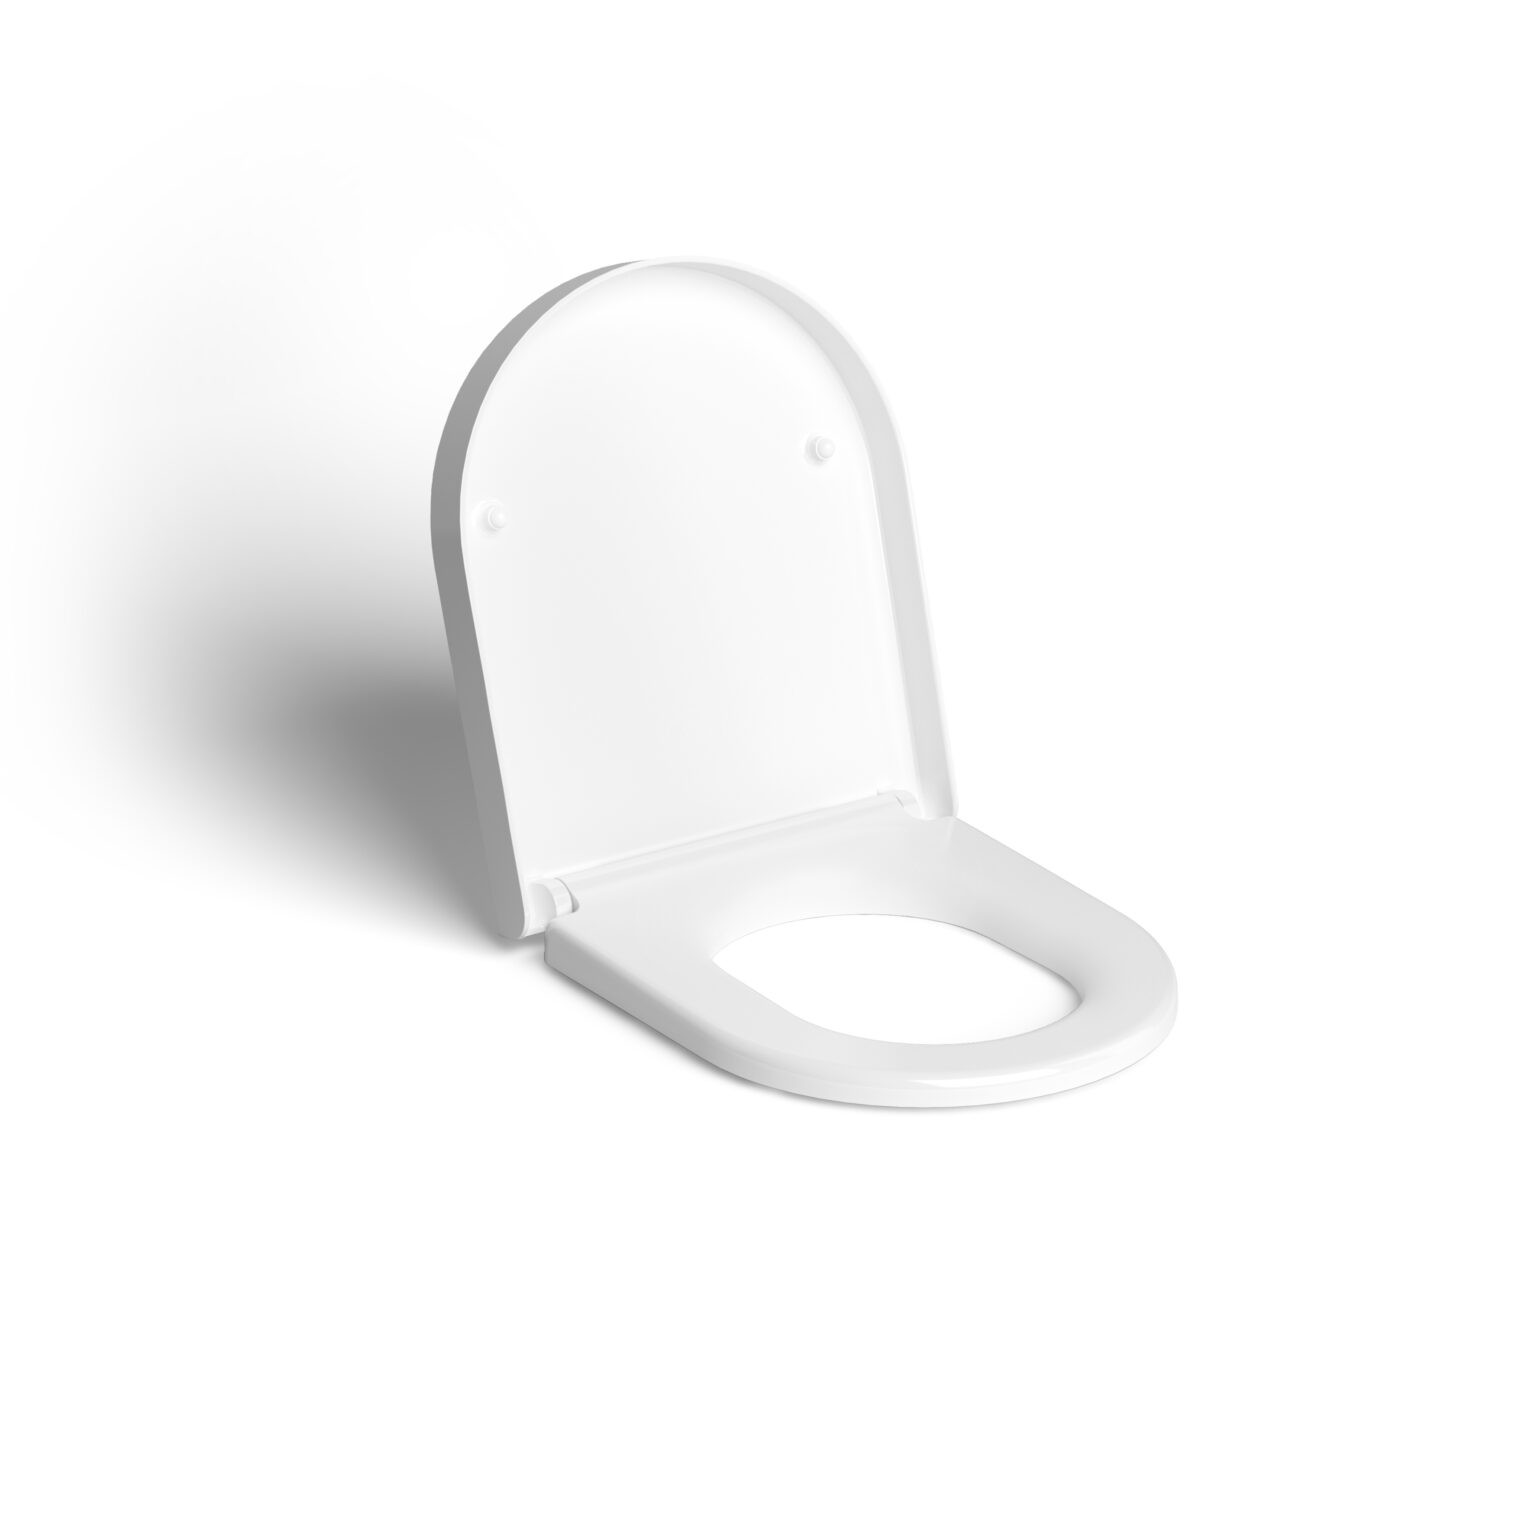 toiletzitting-soft-close-glanzend-wit-abs-toilet-badkamer-luxe-sanitair-First-clou-CL0406030